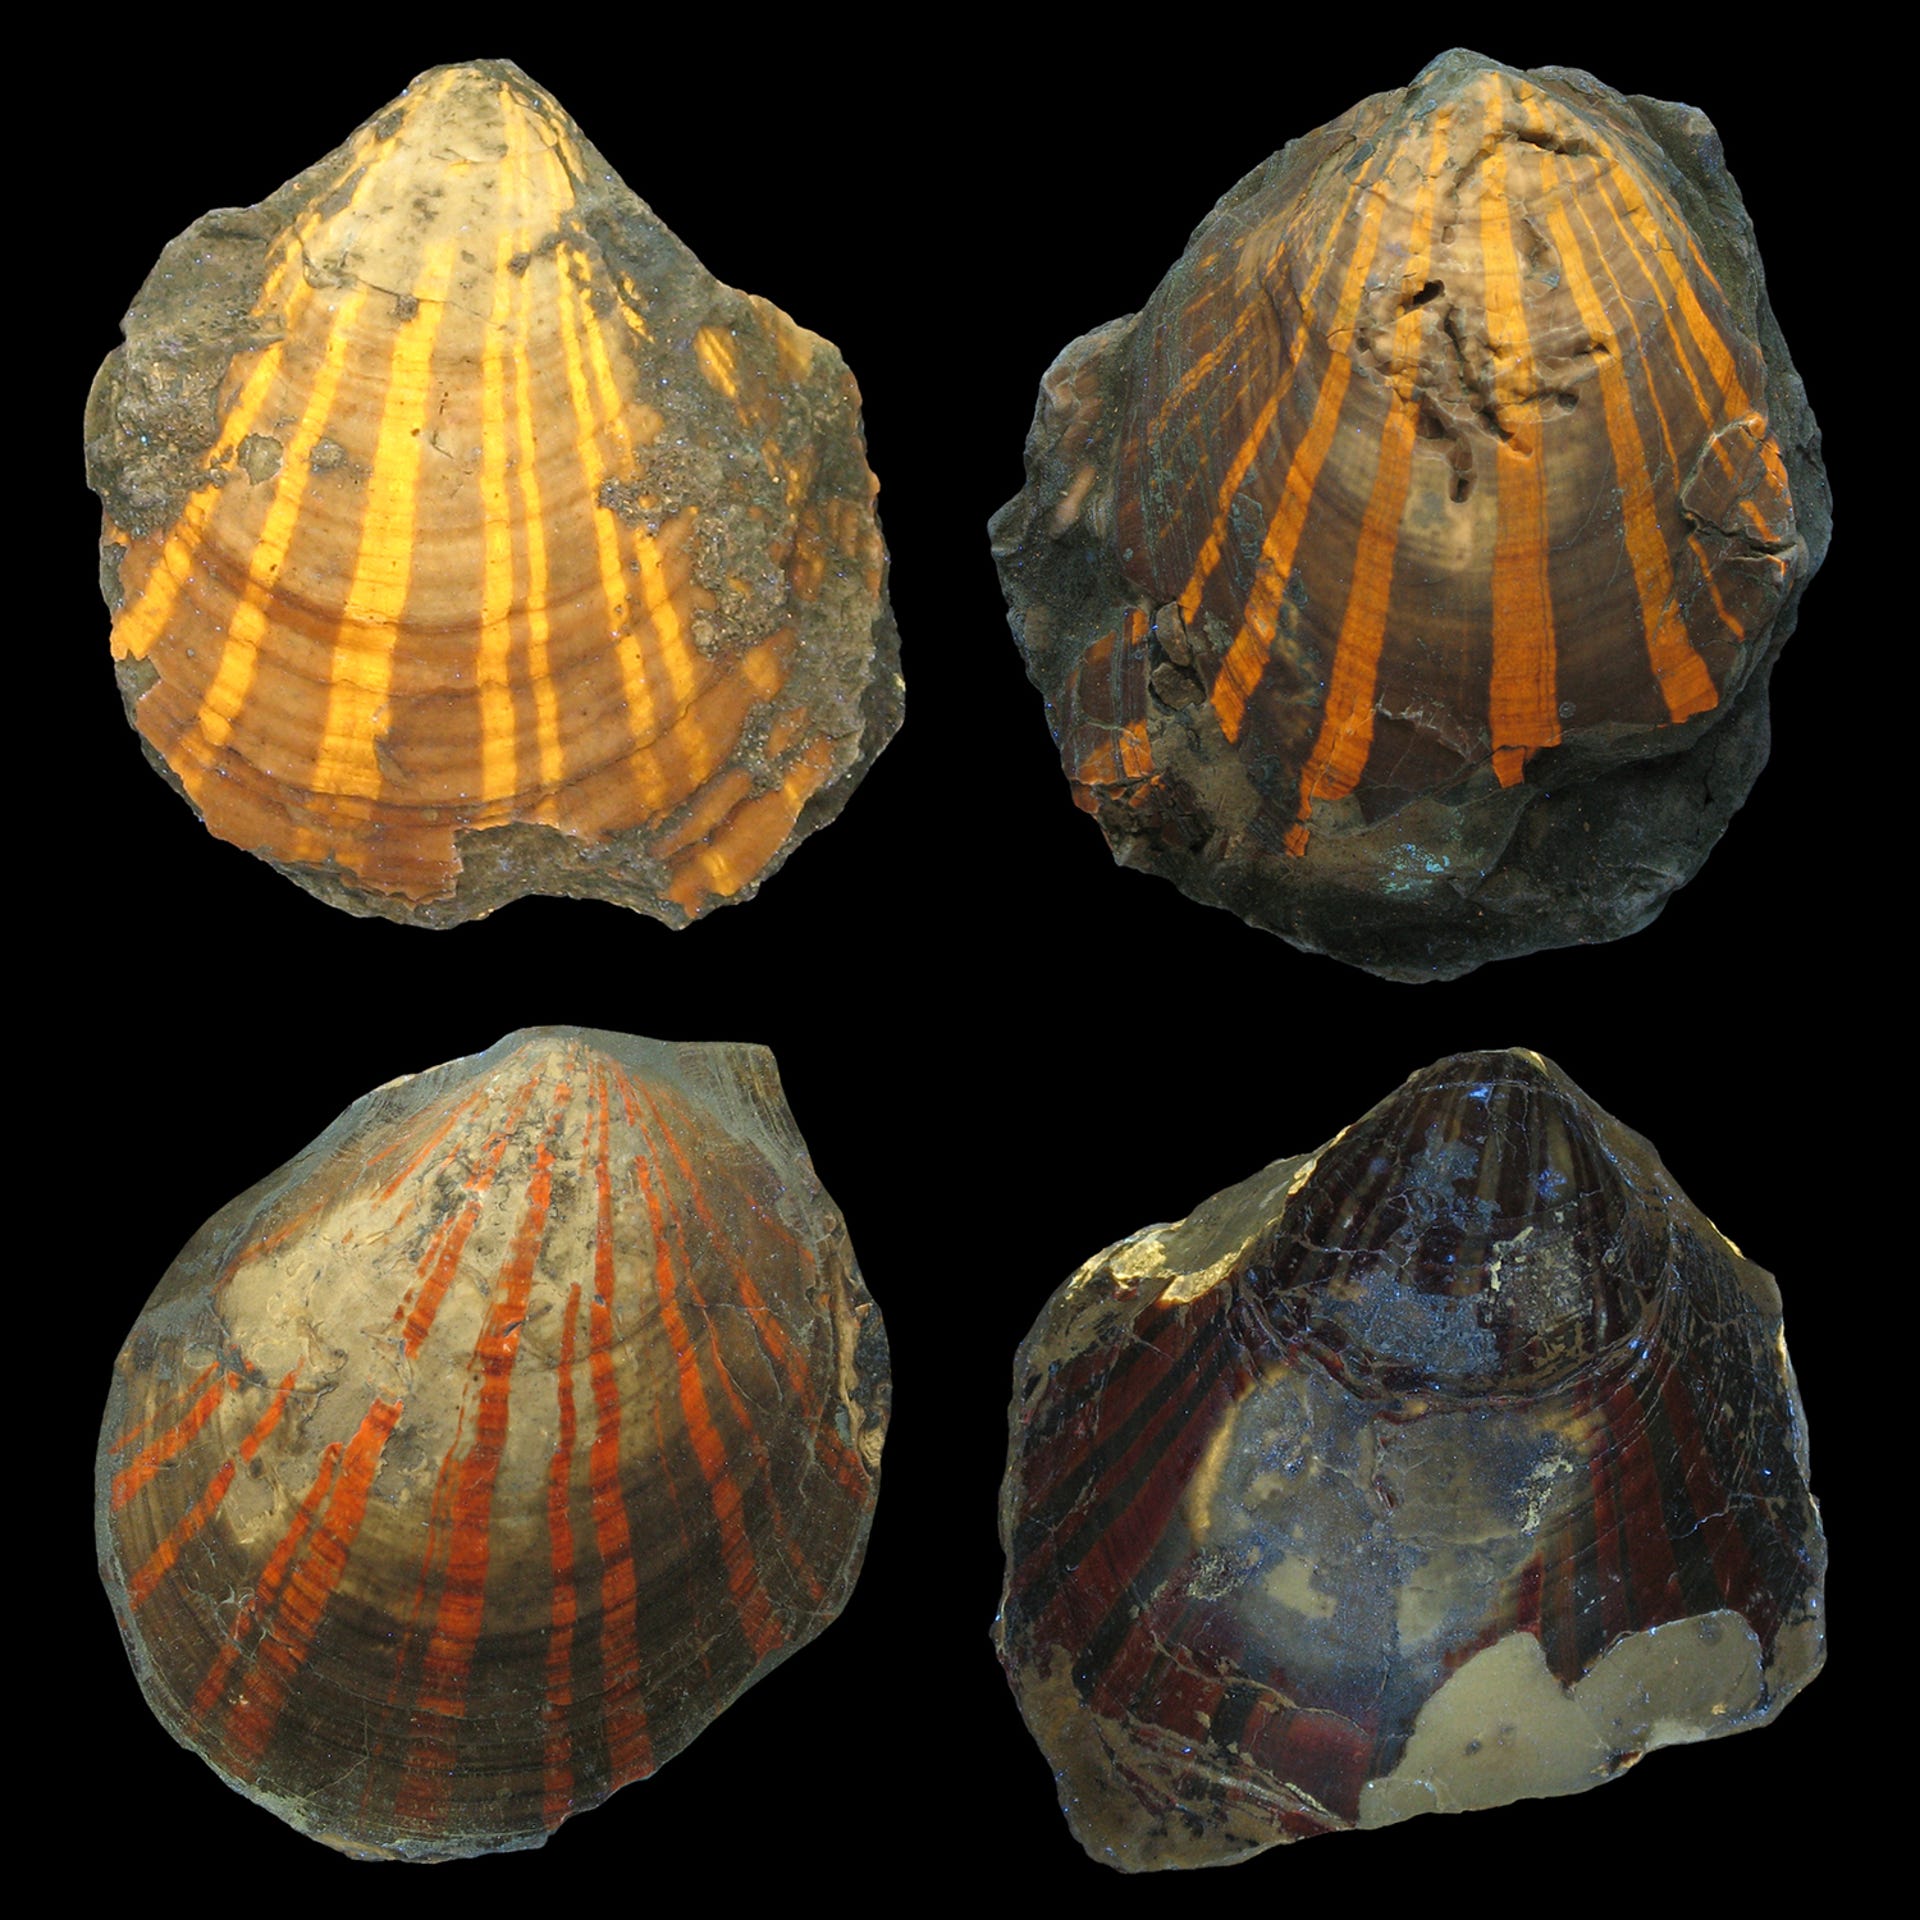 Four fossil scallop shells show different stripey shades of yellow, orange and red under UV light.